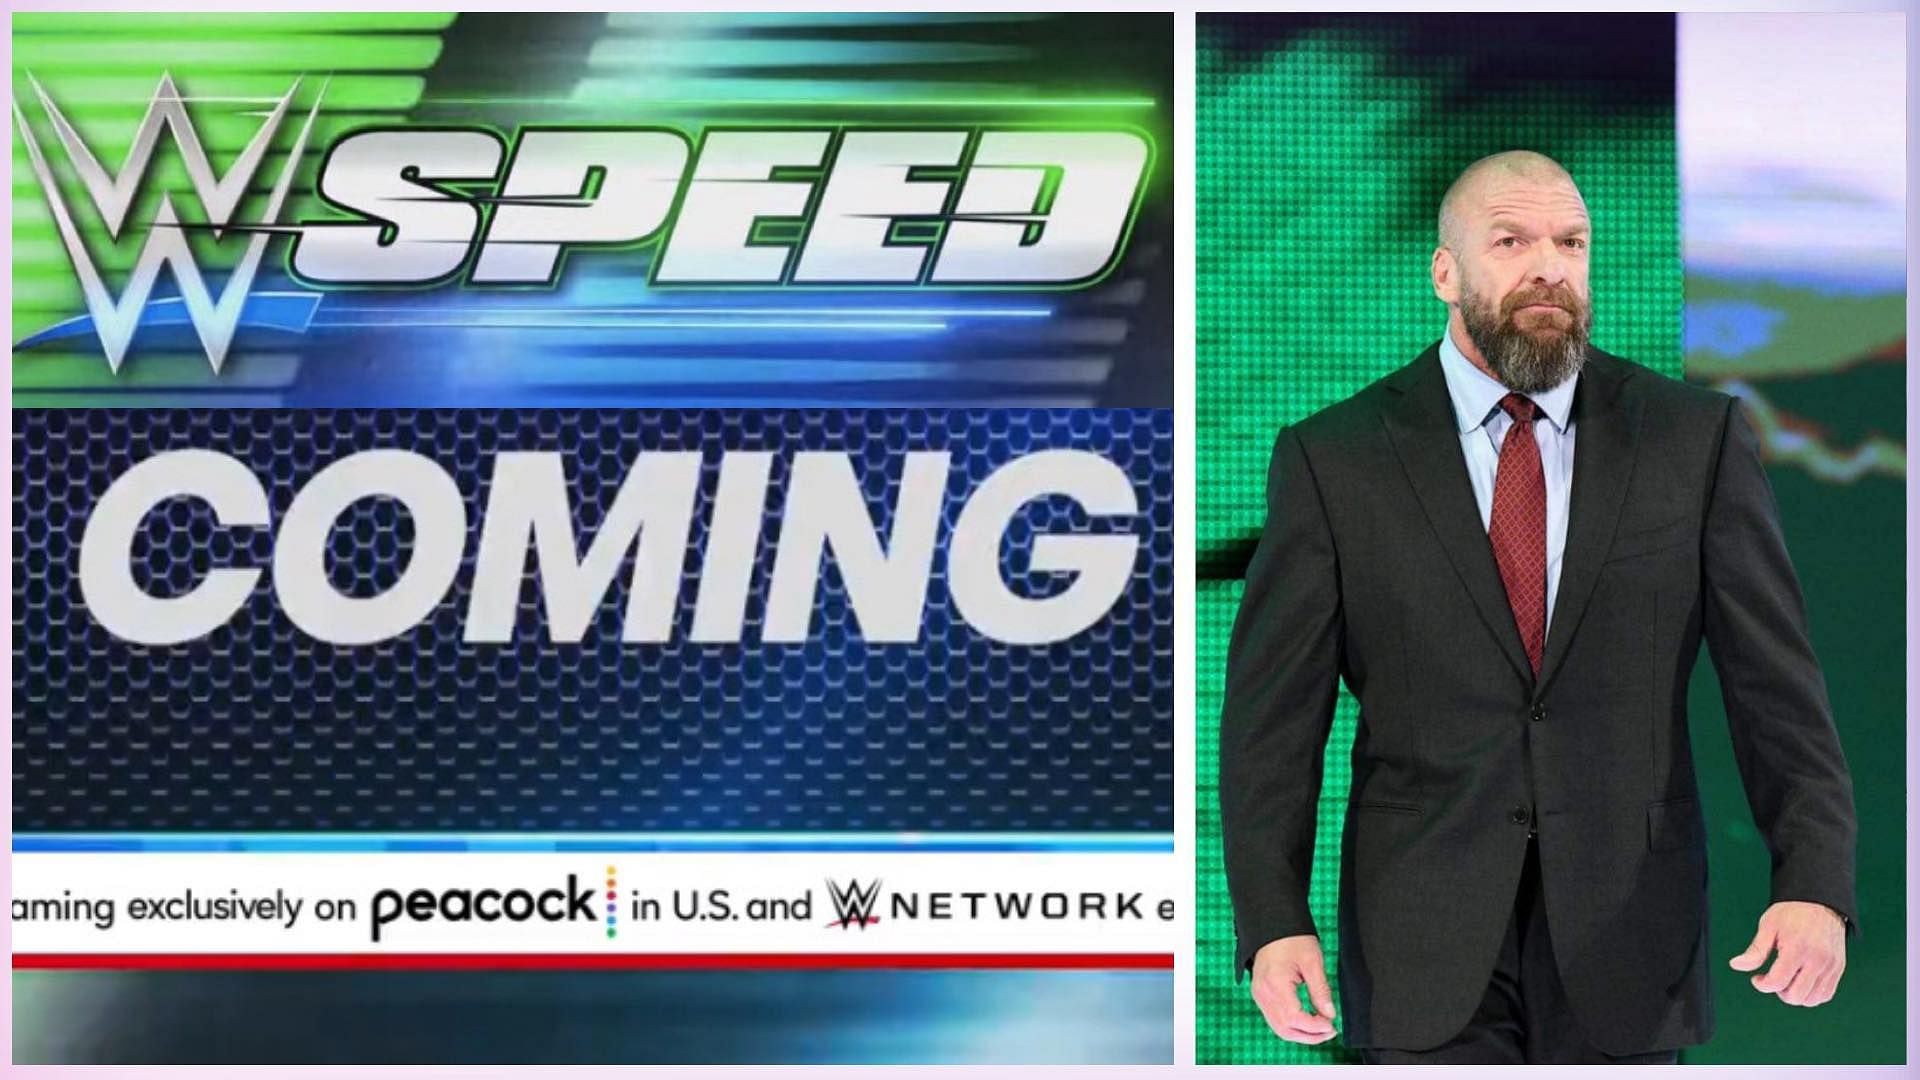 WWE Speed will be the first new weekly episode show of the Triple H era